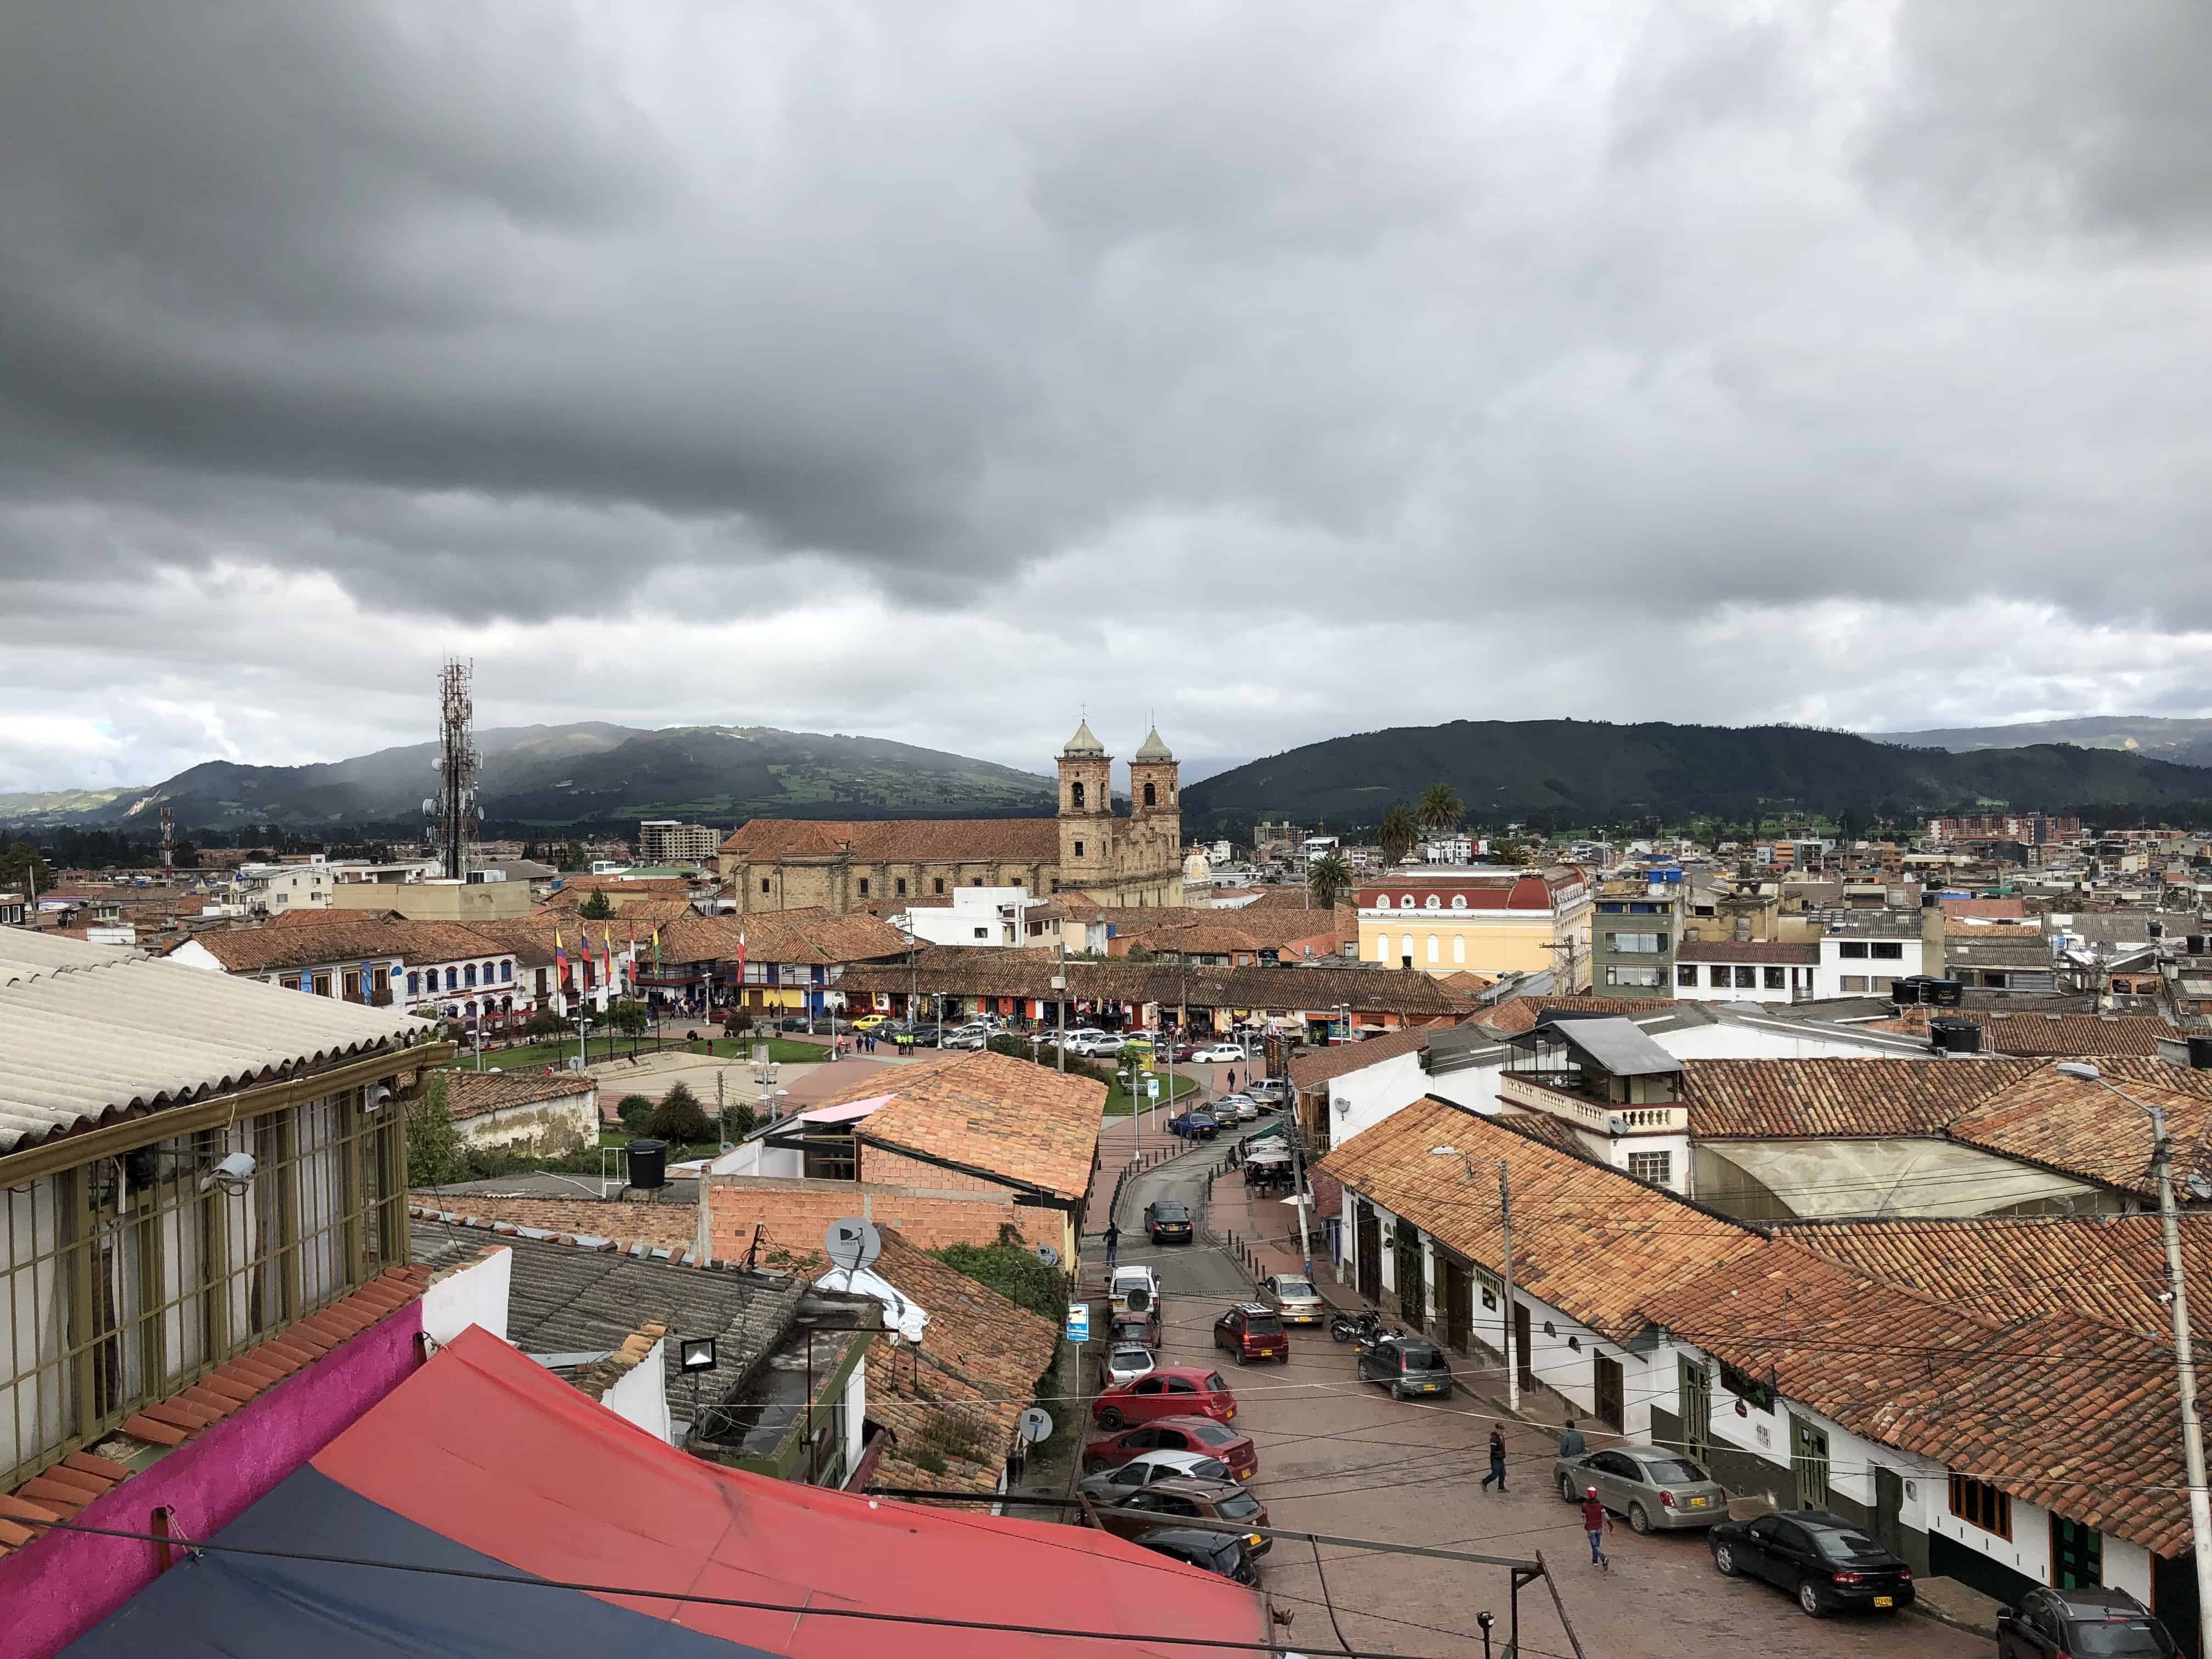 View of Zipaquirá from Our Lady of Sorrows